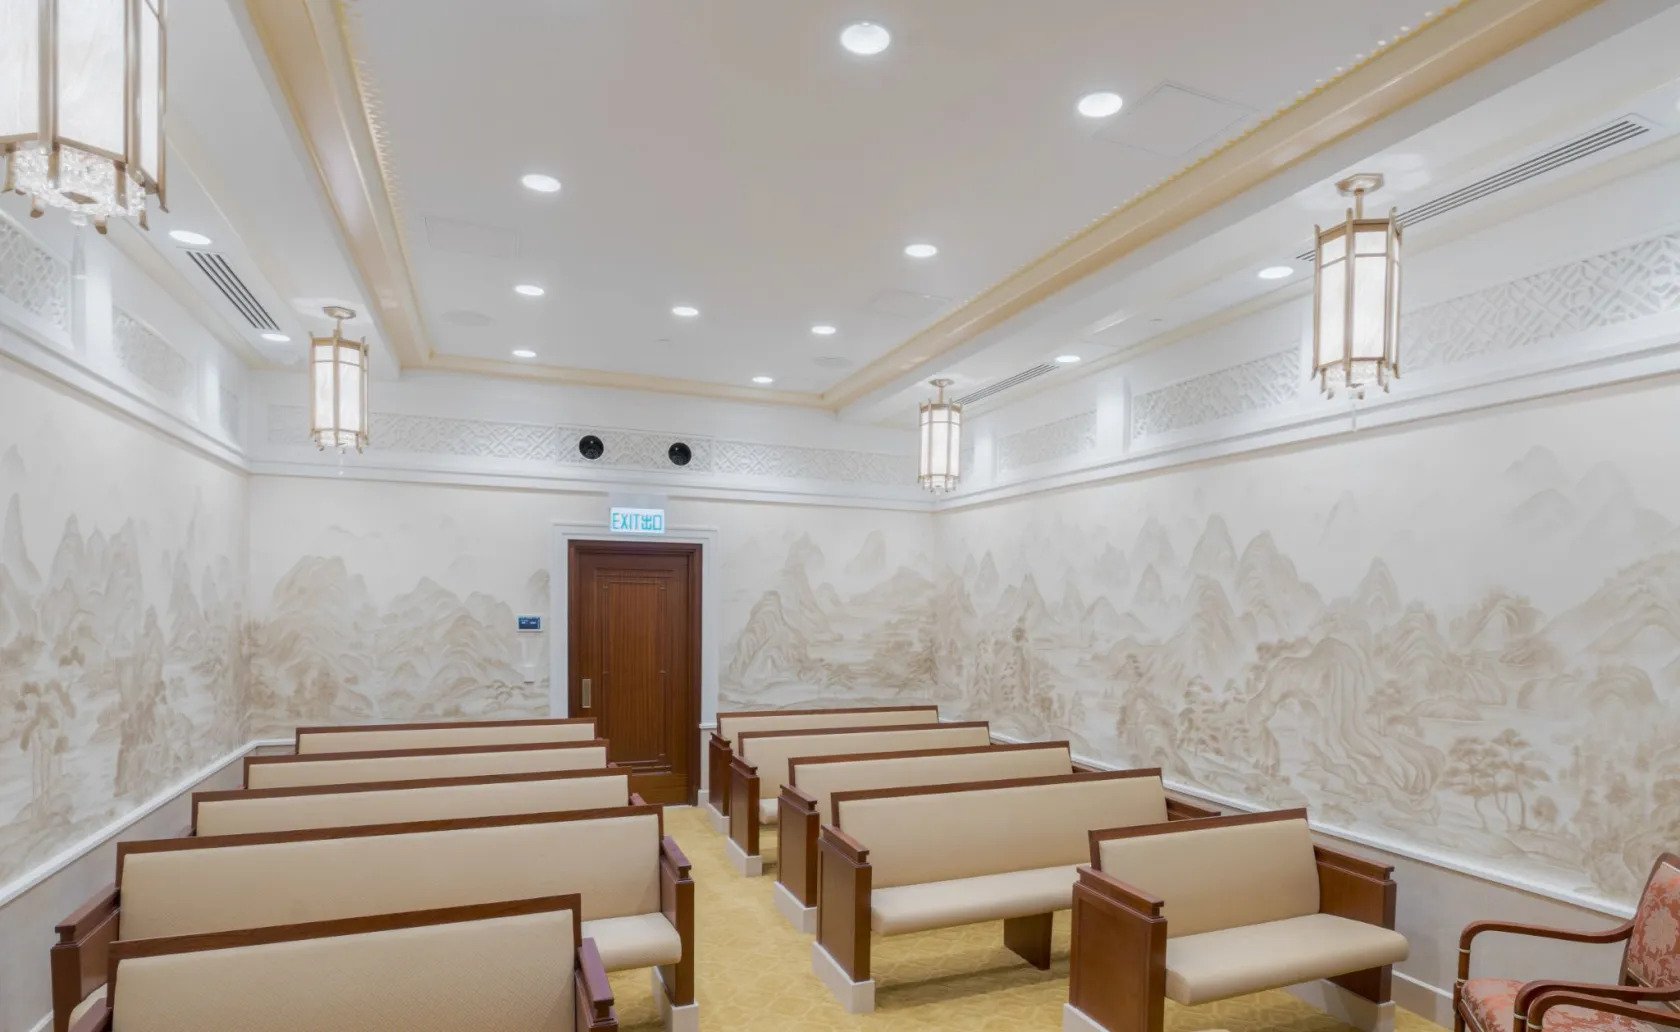 An instruction room inside the Hong Kong temple, with two rows of pews and a mural of mountains on the walls.